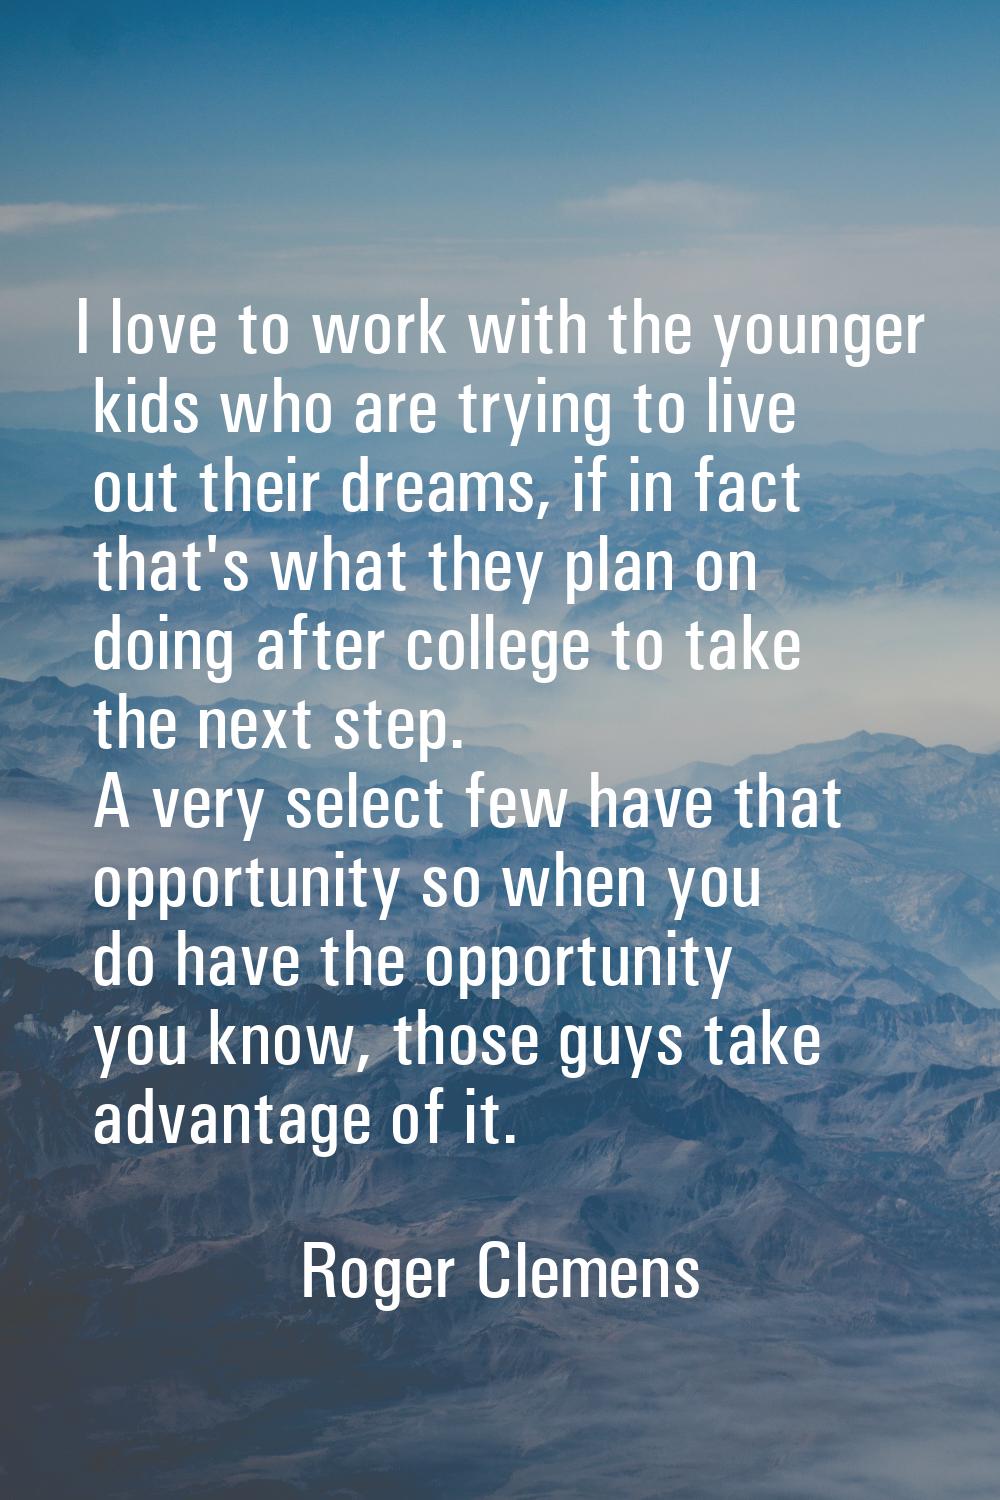 I love to work with the younger kids who are trying to live out their dreams, if in fact that's wha